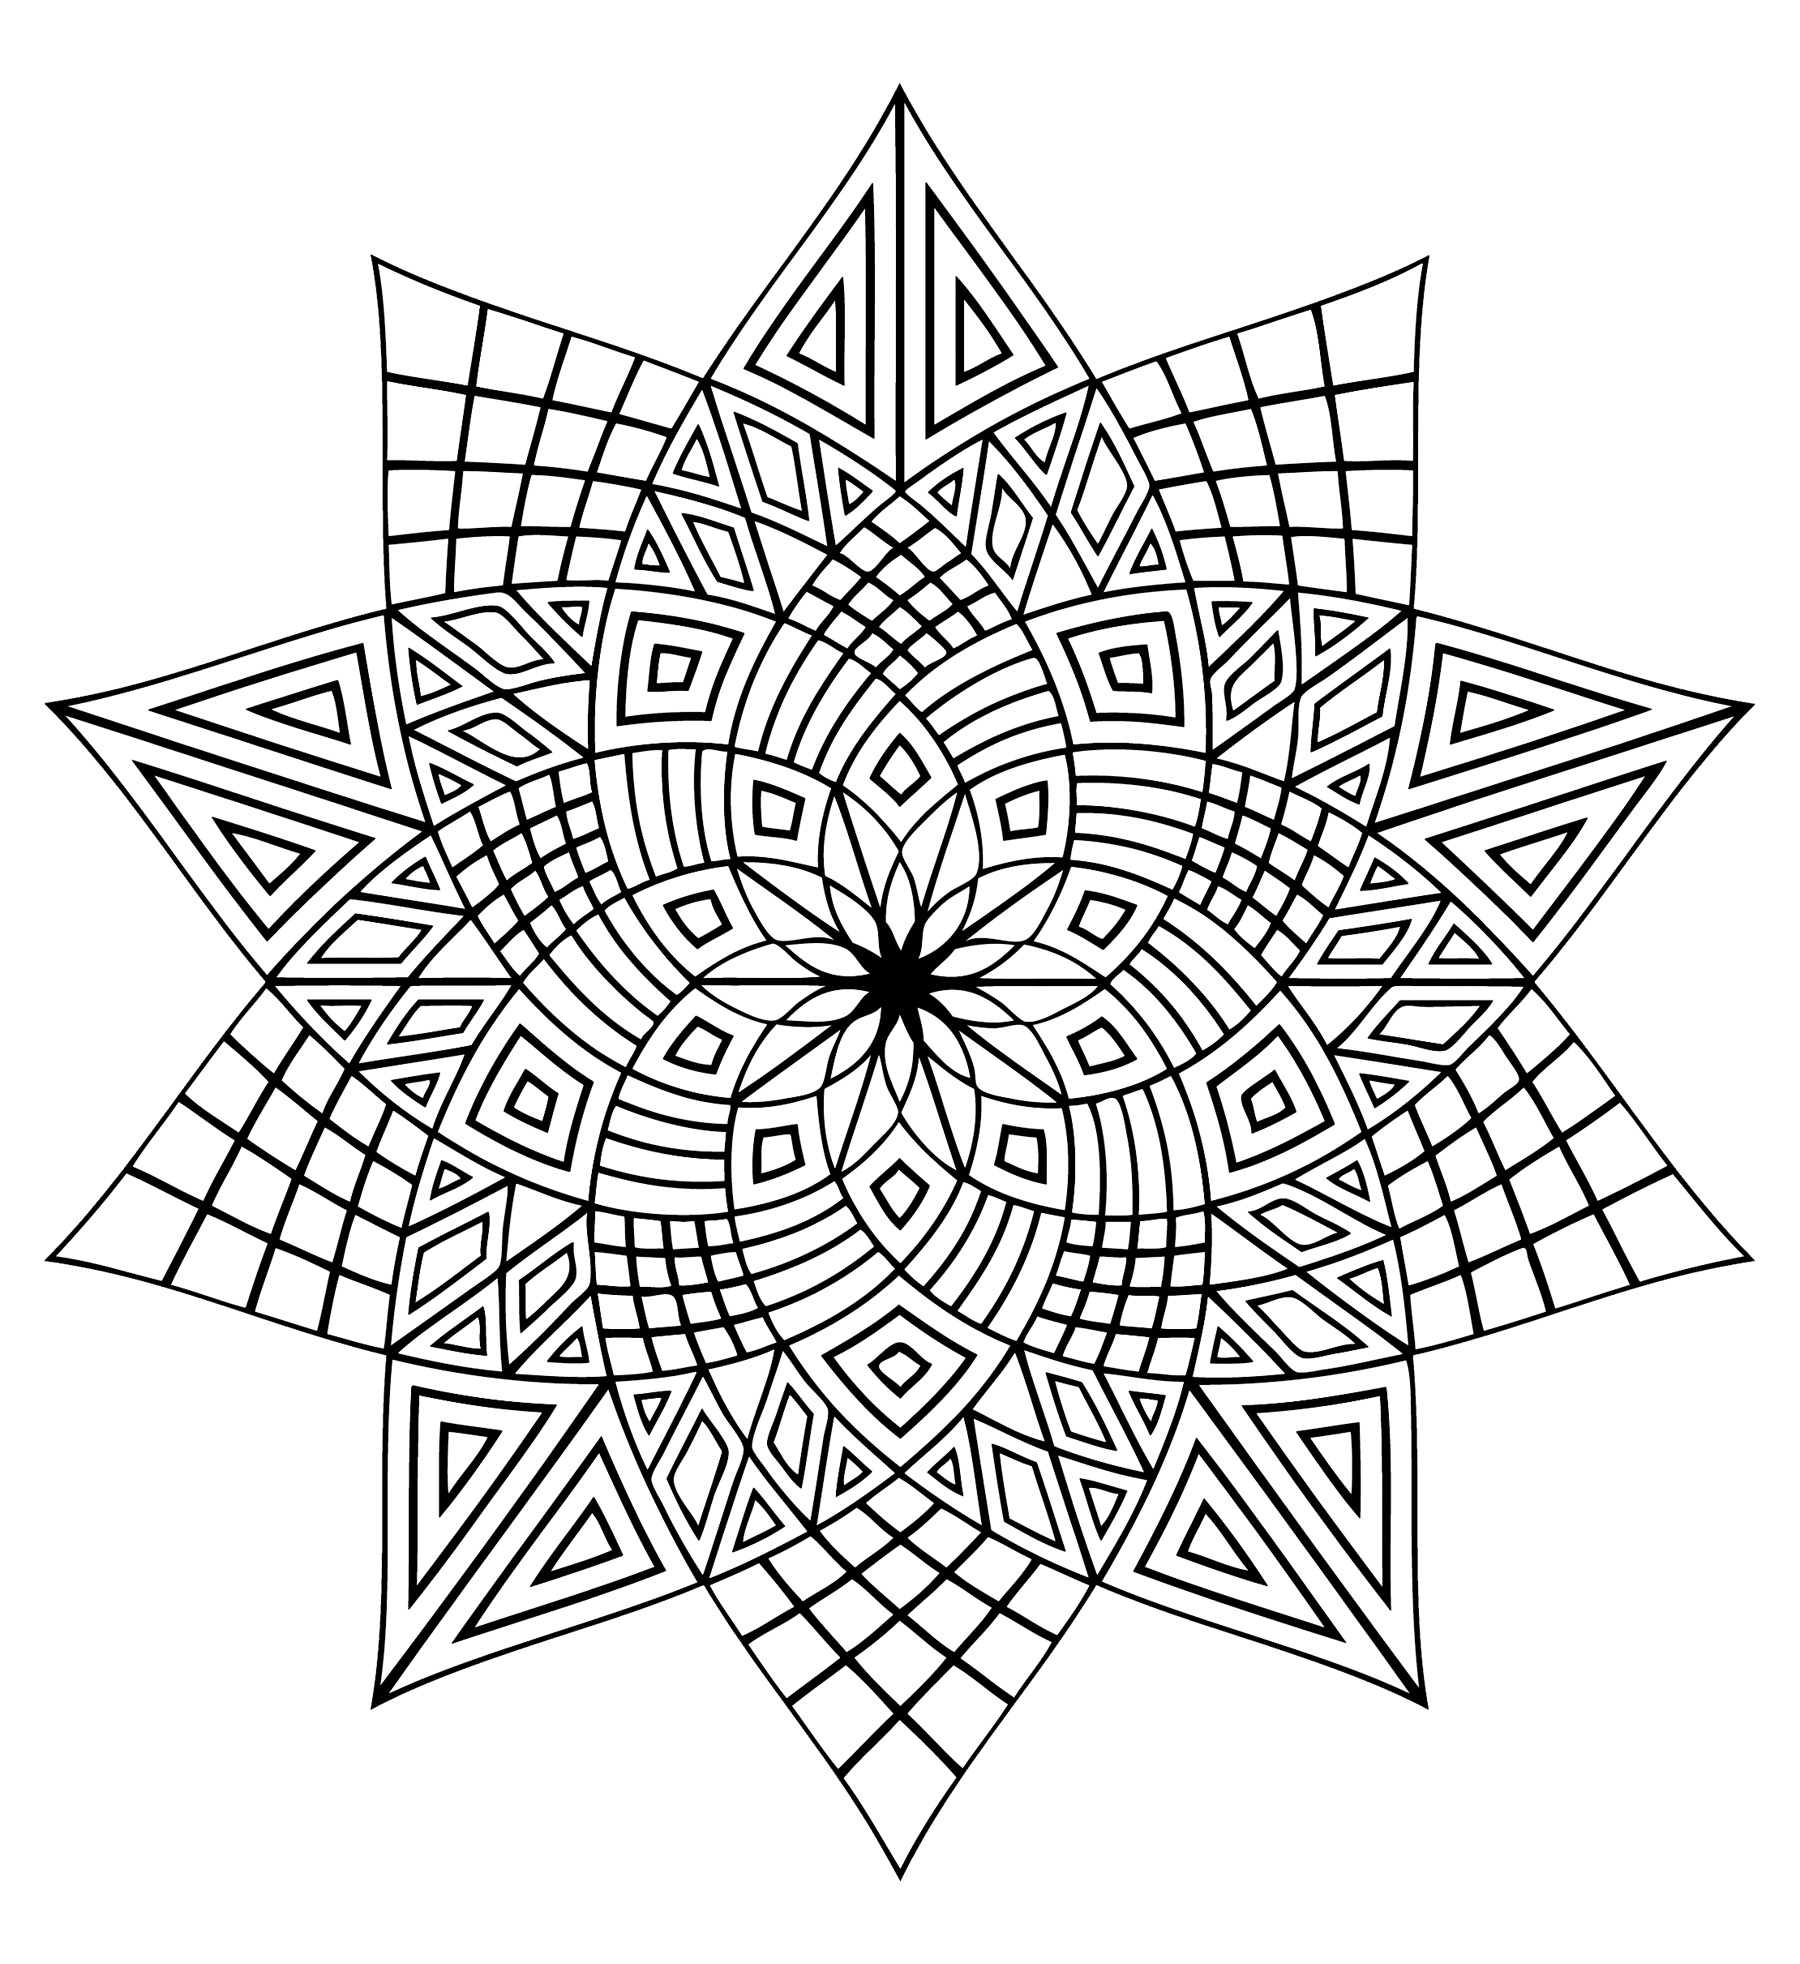 A very mystical mandala with star form, this coloring will allow you an appreciable moment of relaxation